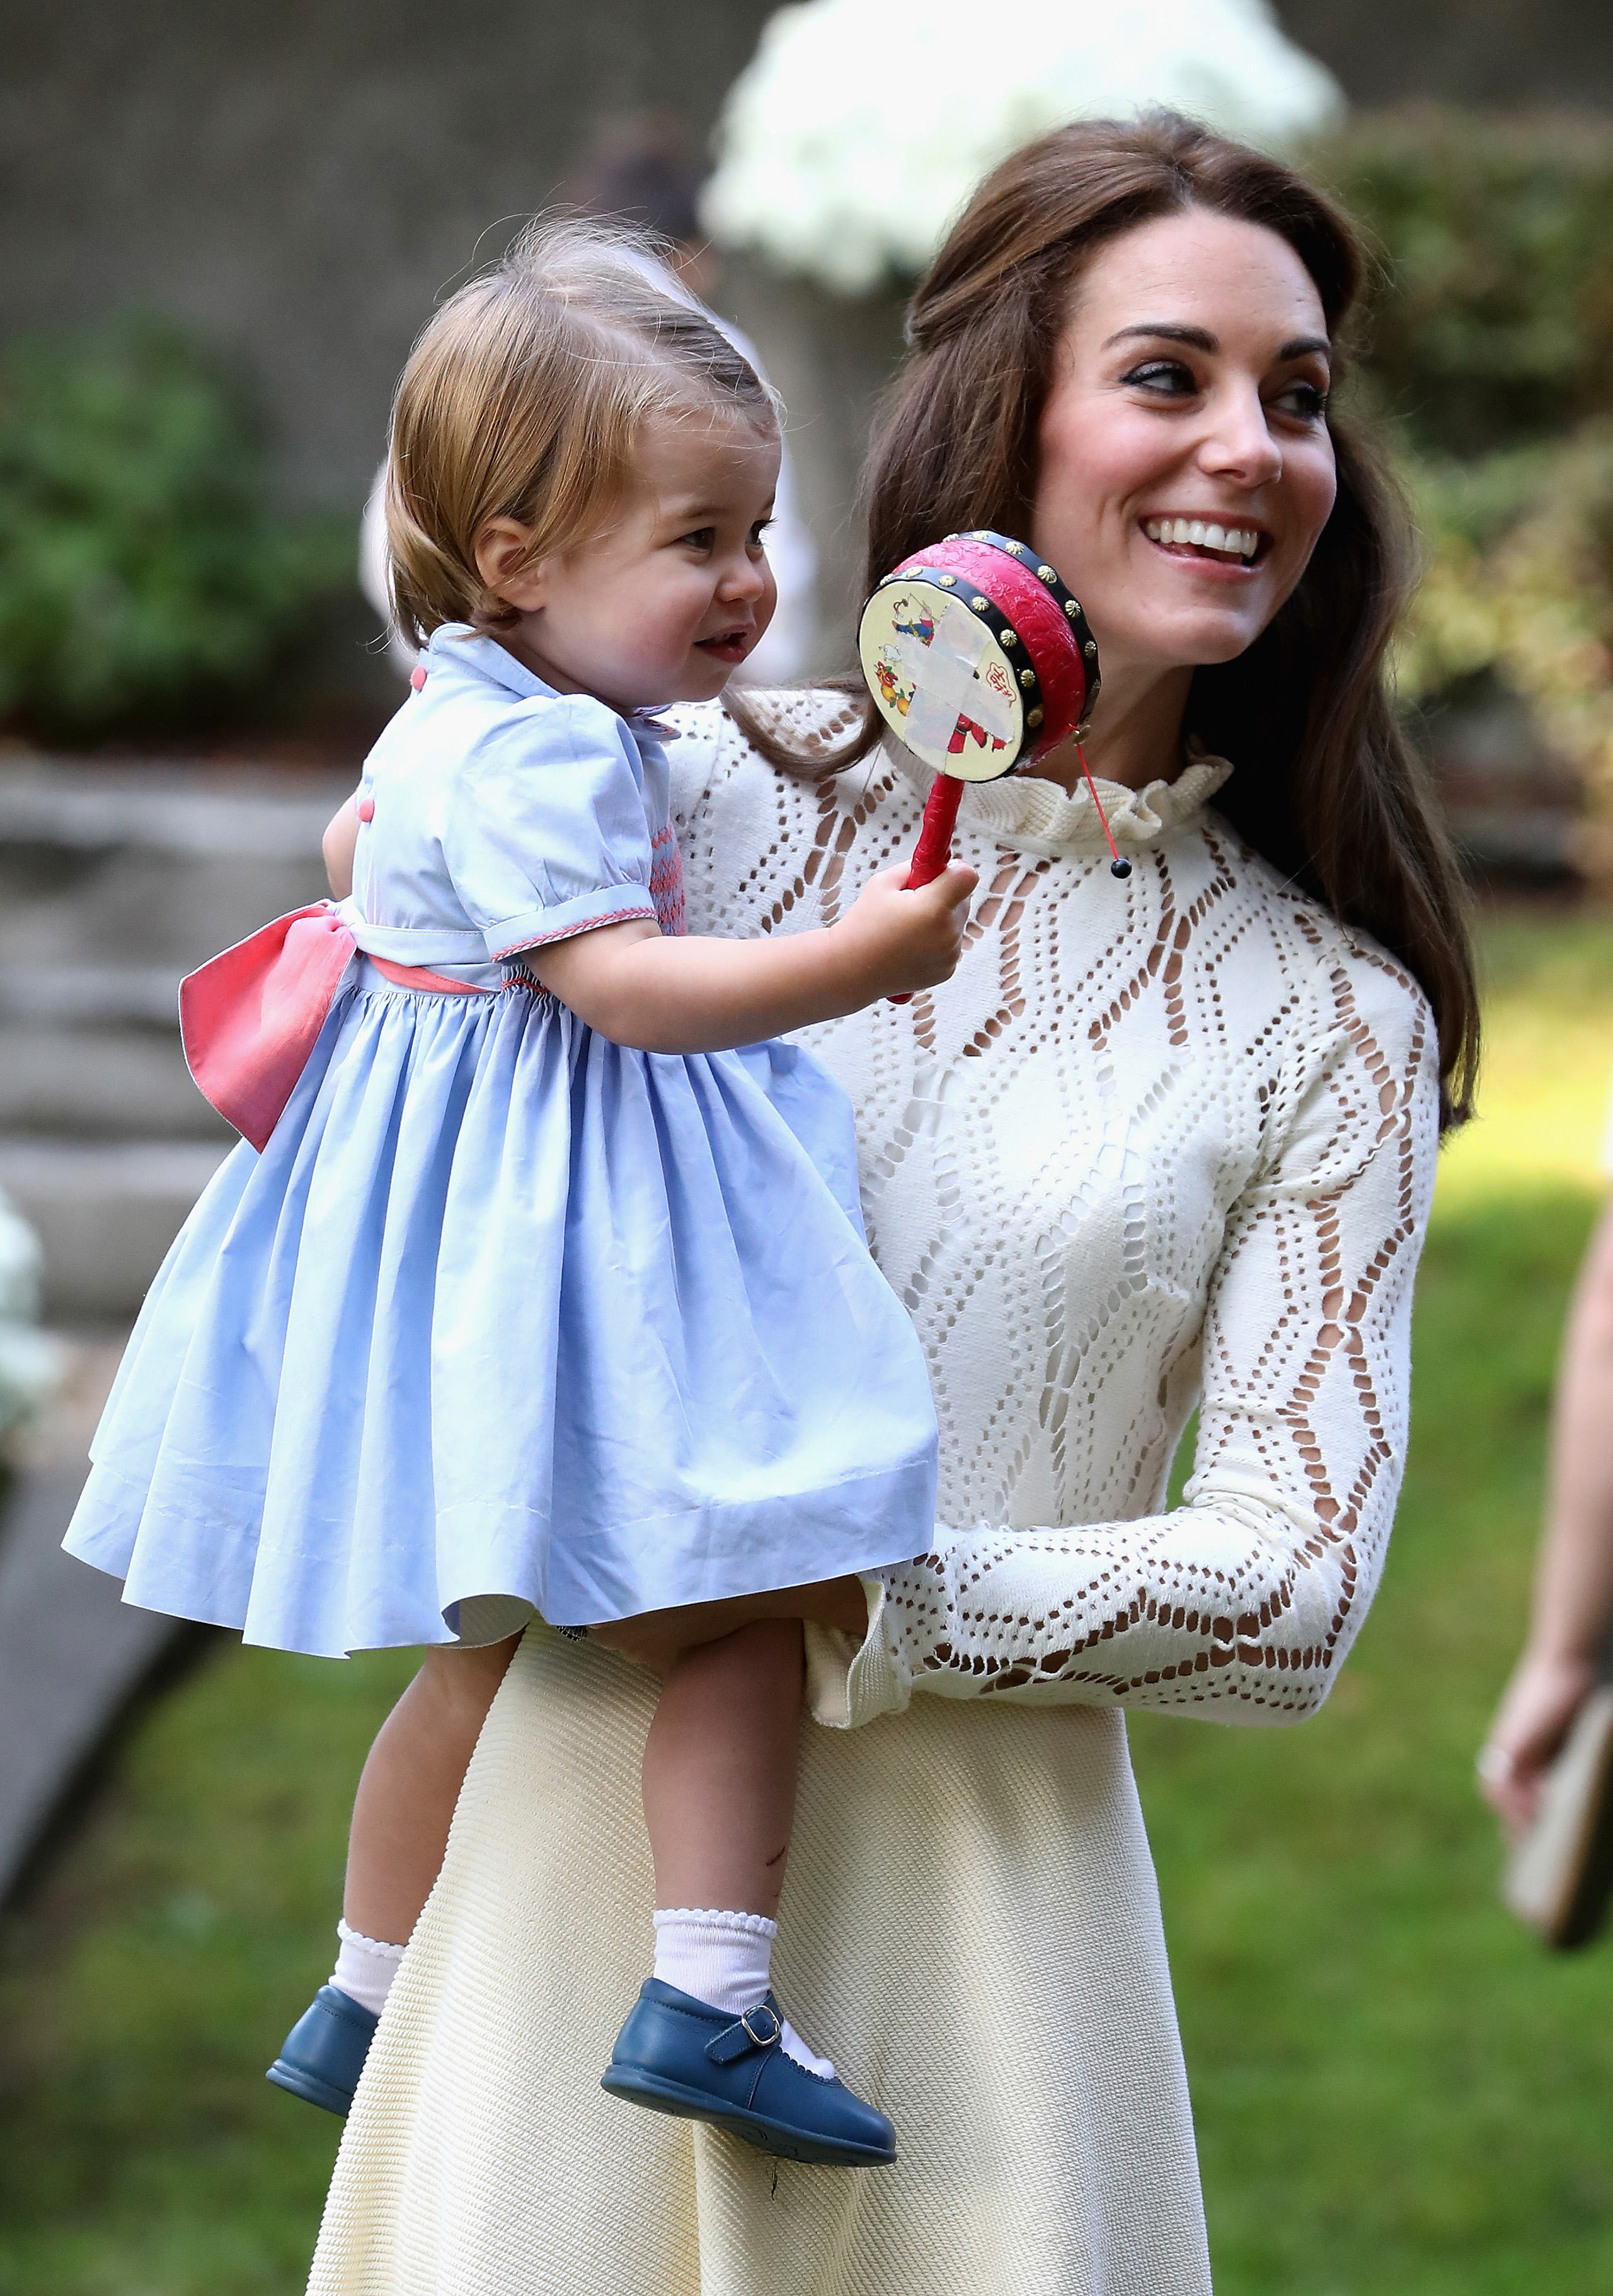 Catherine, Duchess of Cambridge, and Princess Charlotte of Cambridge at a children's party for Military families in Carcross, Canada, on Sept. 29, 2016.